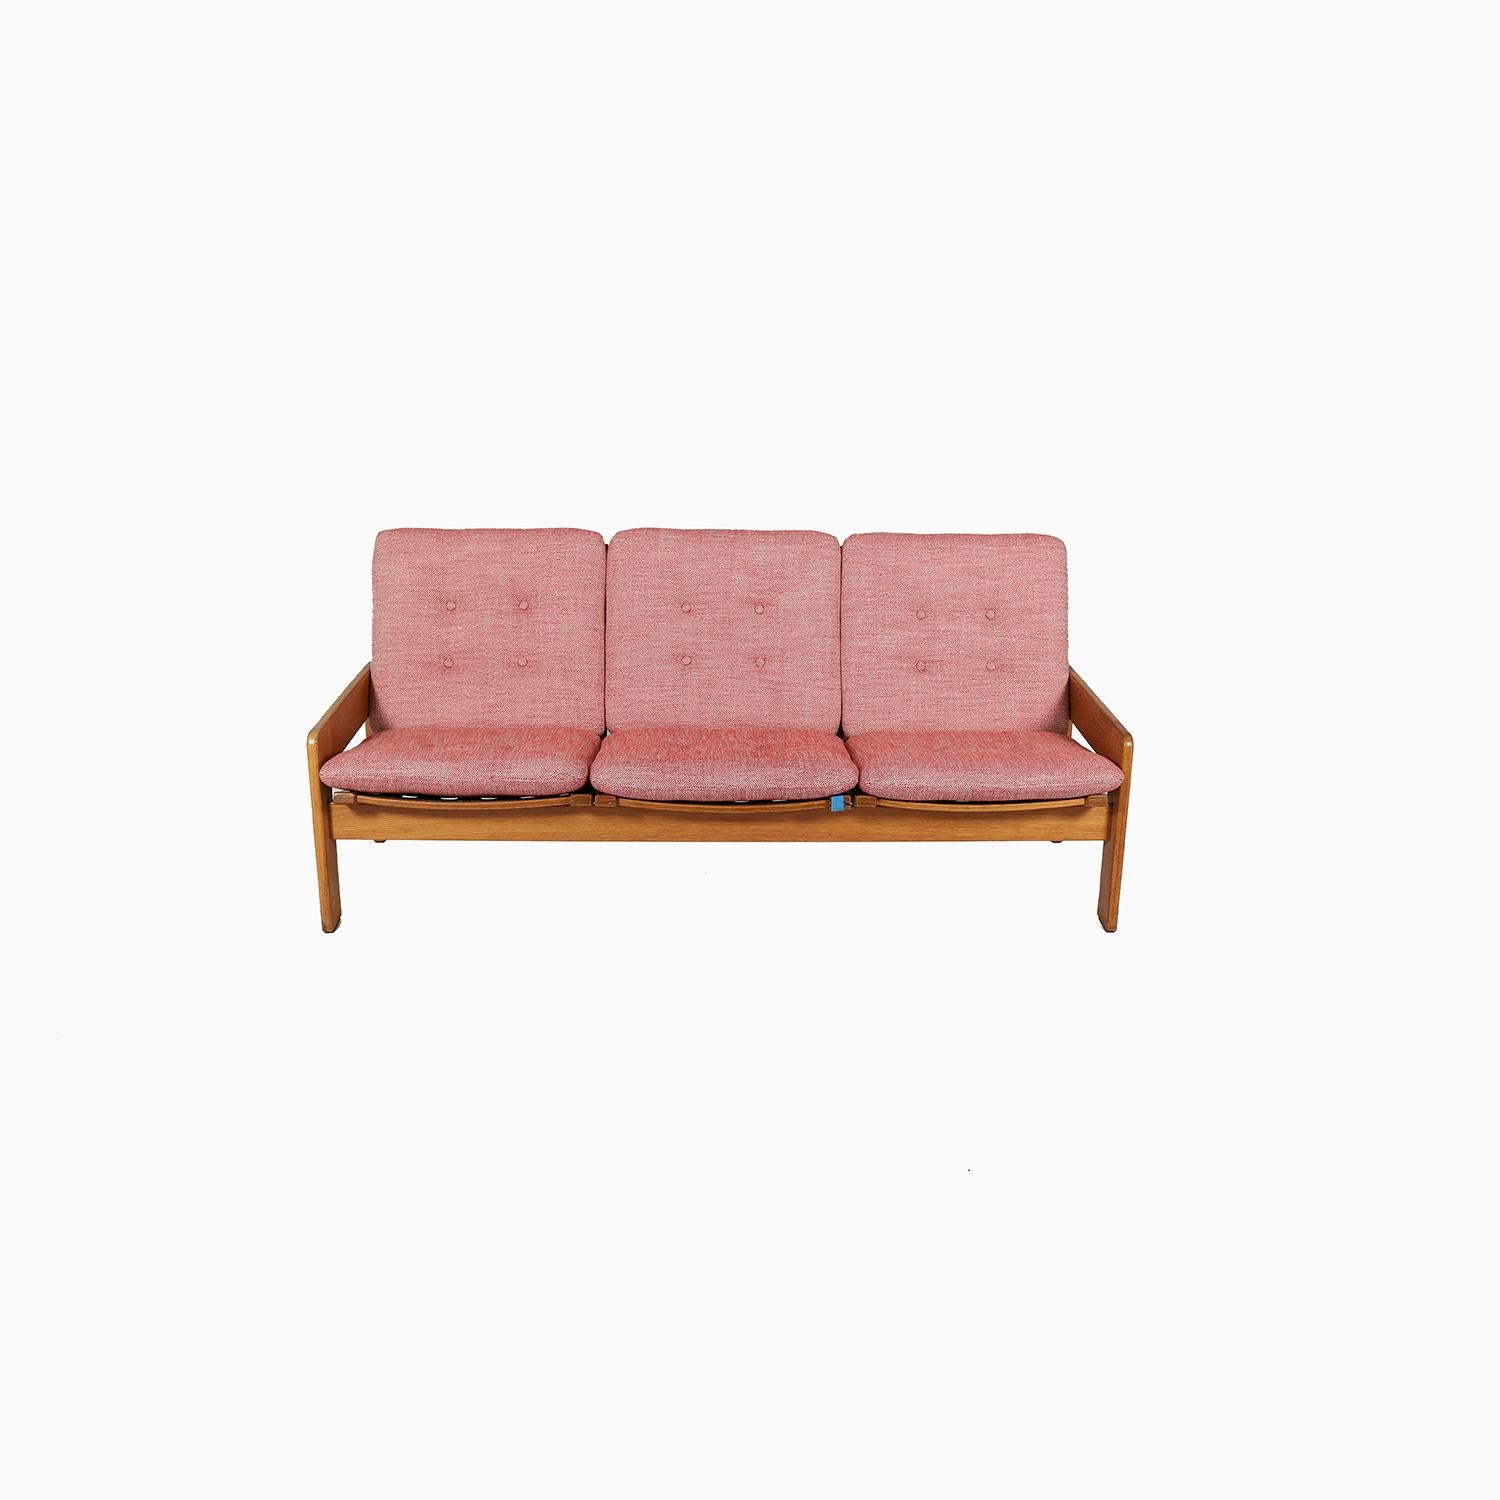 A hard to find three seat sofa designed by one of Sweden’s most well known designers, Yngve Ekstrom. Patinated oak frame and newly upholstered in Pollack Textiles ” West Coast” Trolley Car. Restoration of the frame will be completed upon